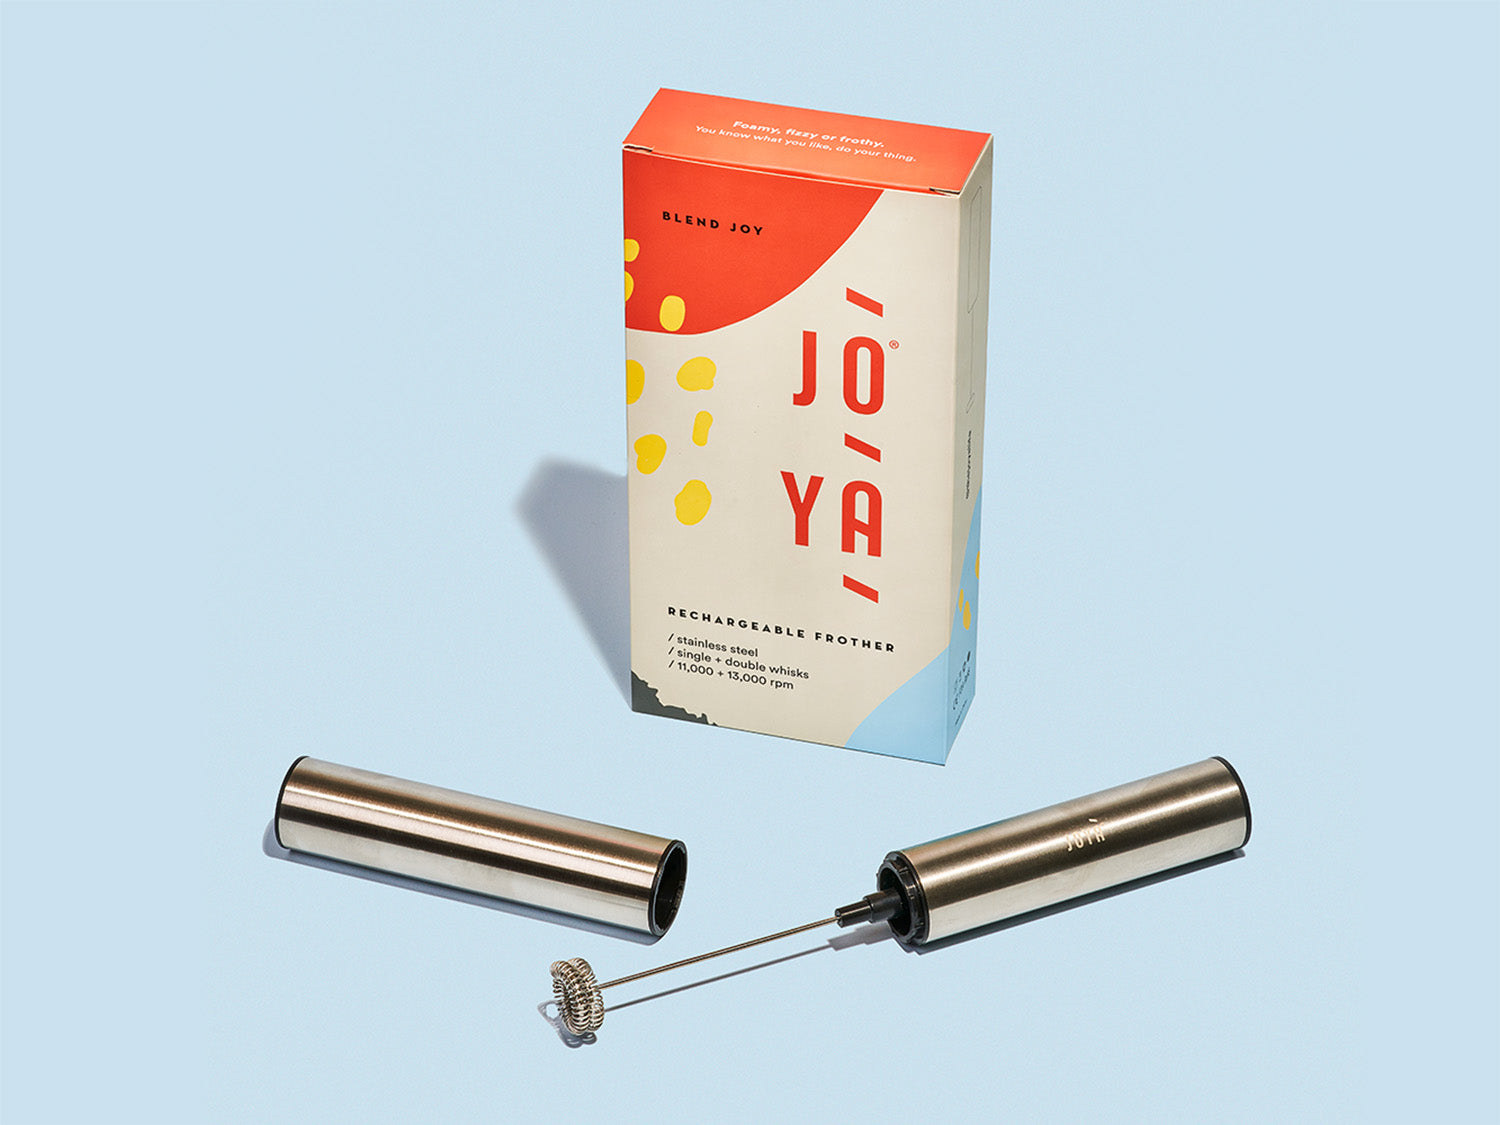 JOYÀ rechargeable handheld frother sitting beside its branded box on a blue background